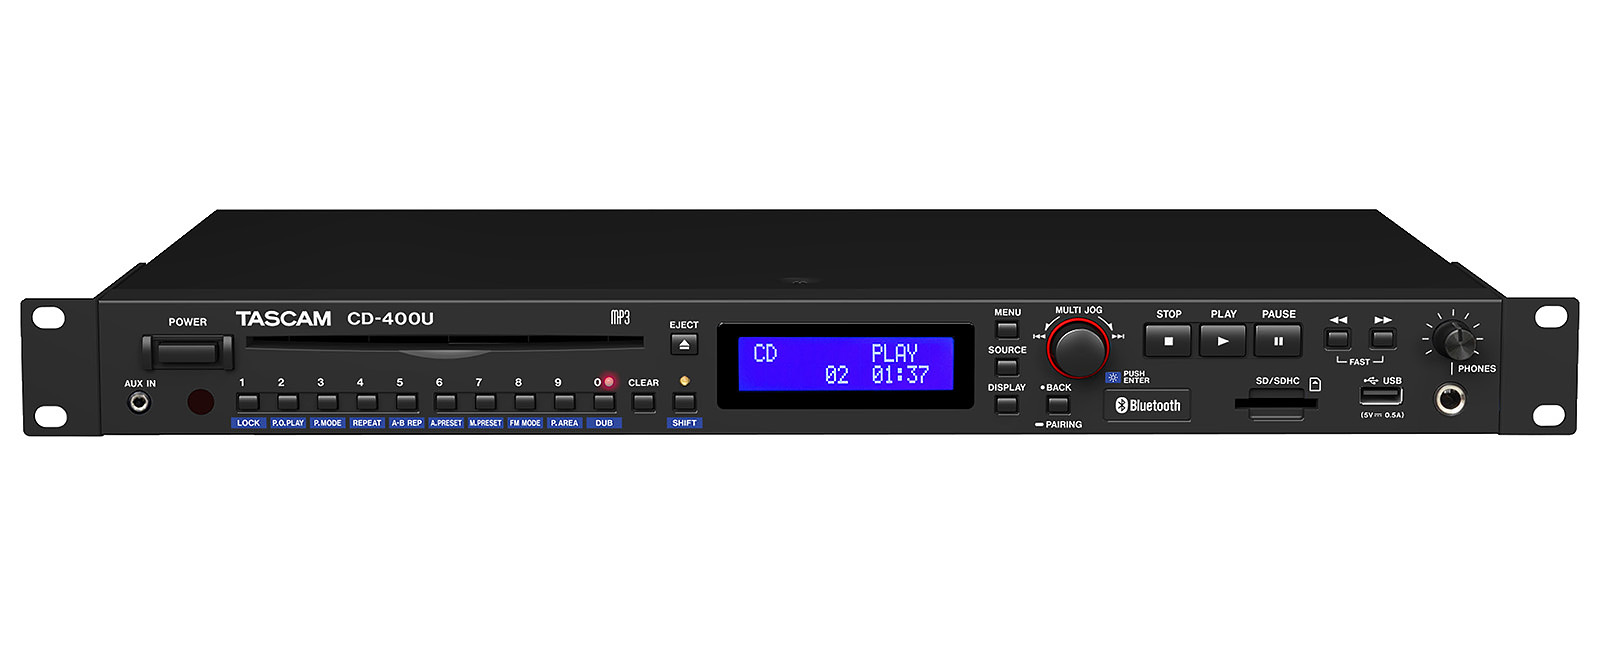 CD-400U - New Upgraded Version 1.27 of Firmware Released